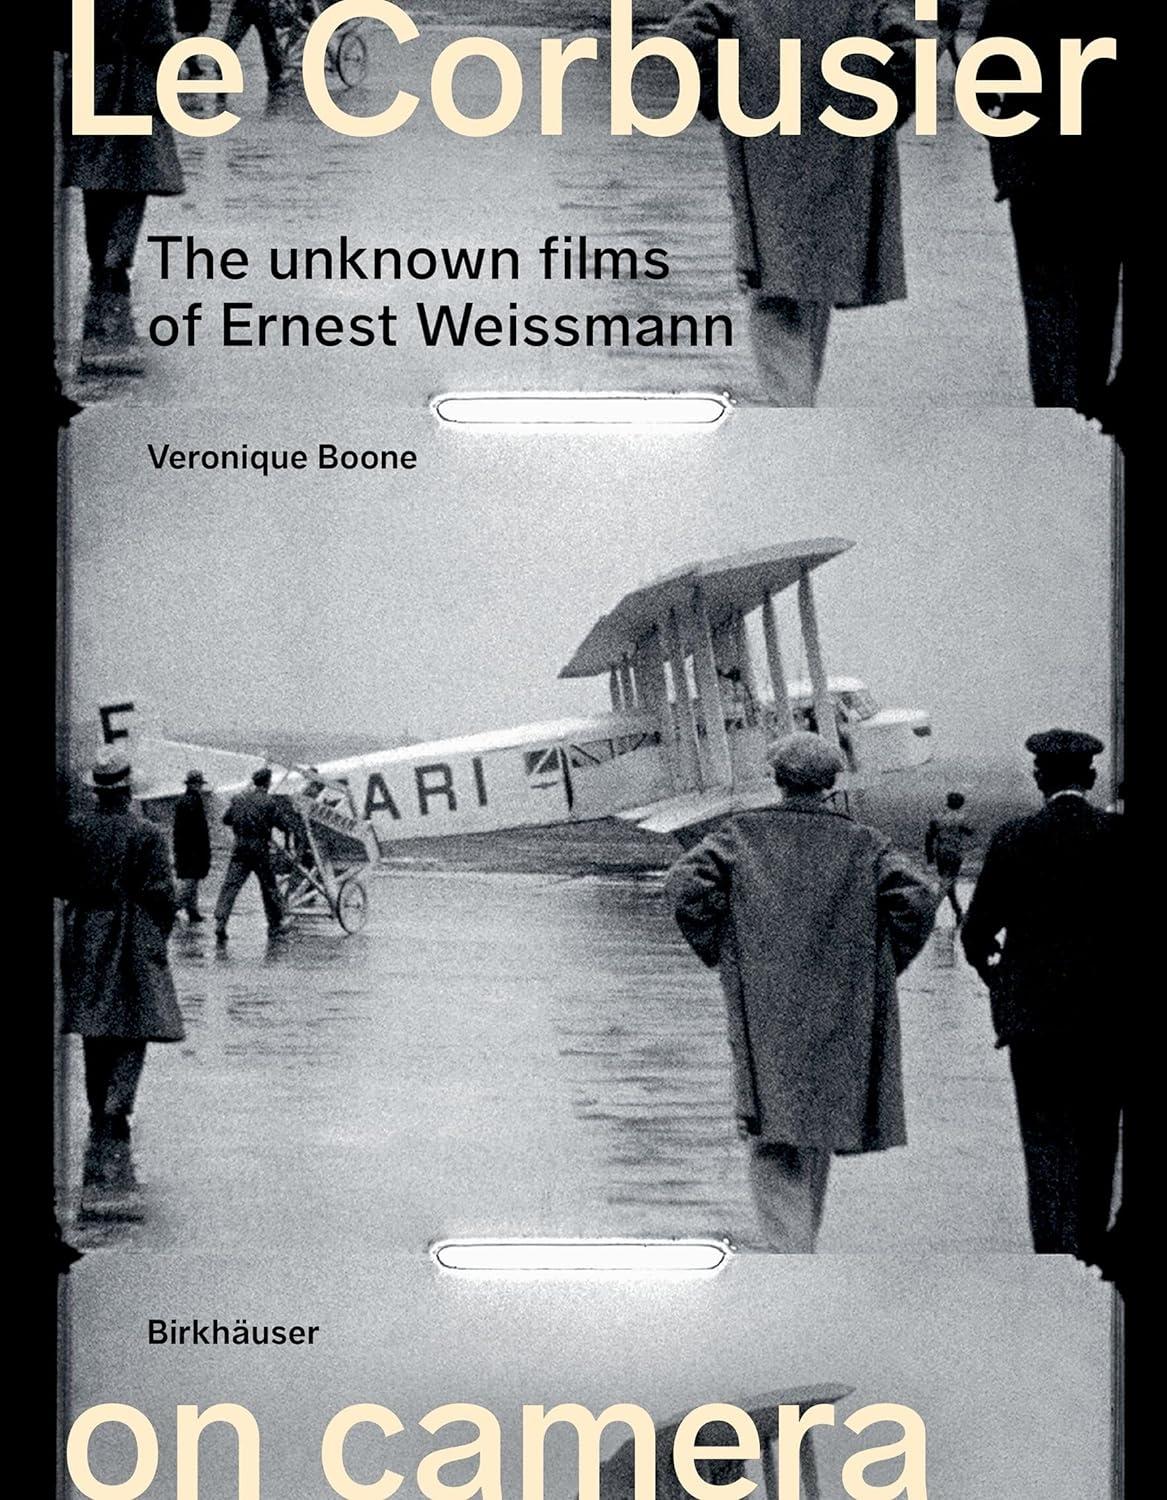 LE CORBUSIER ON CAMERA: THE UNKNOWN FILMS OF ERNEST WEISSMANN